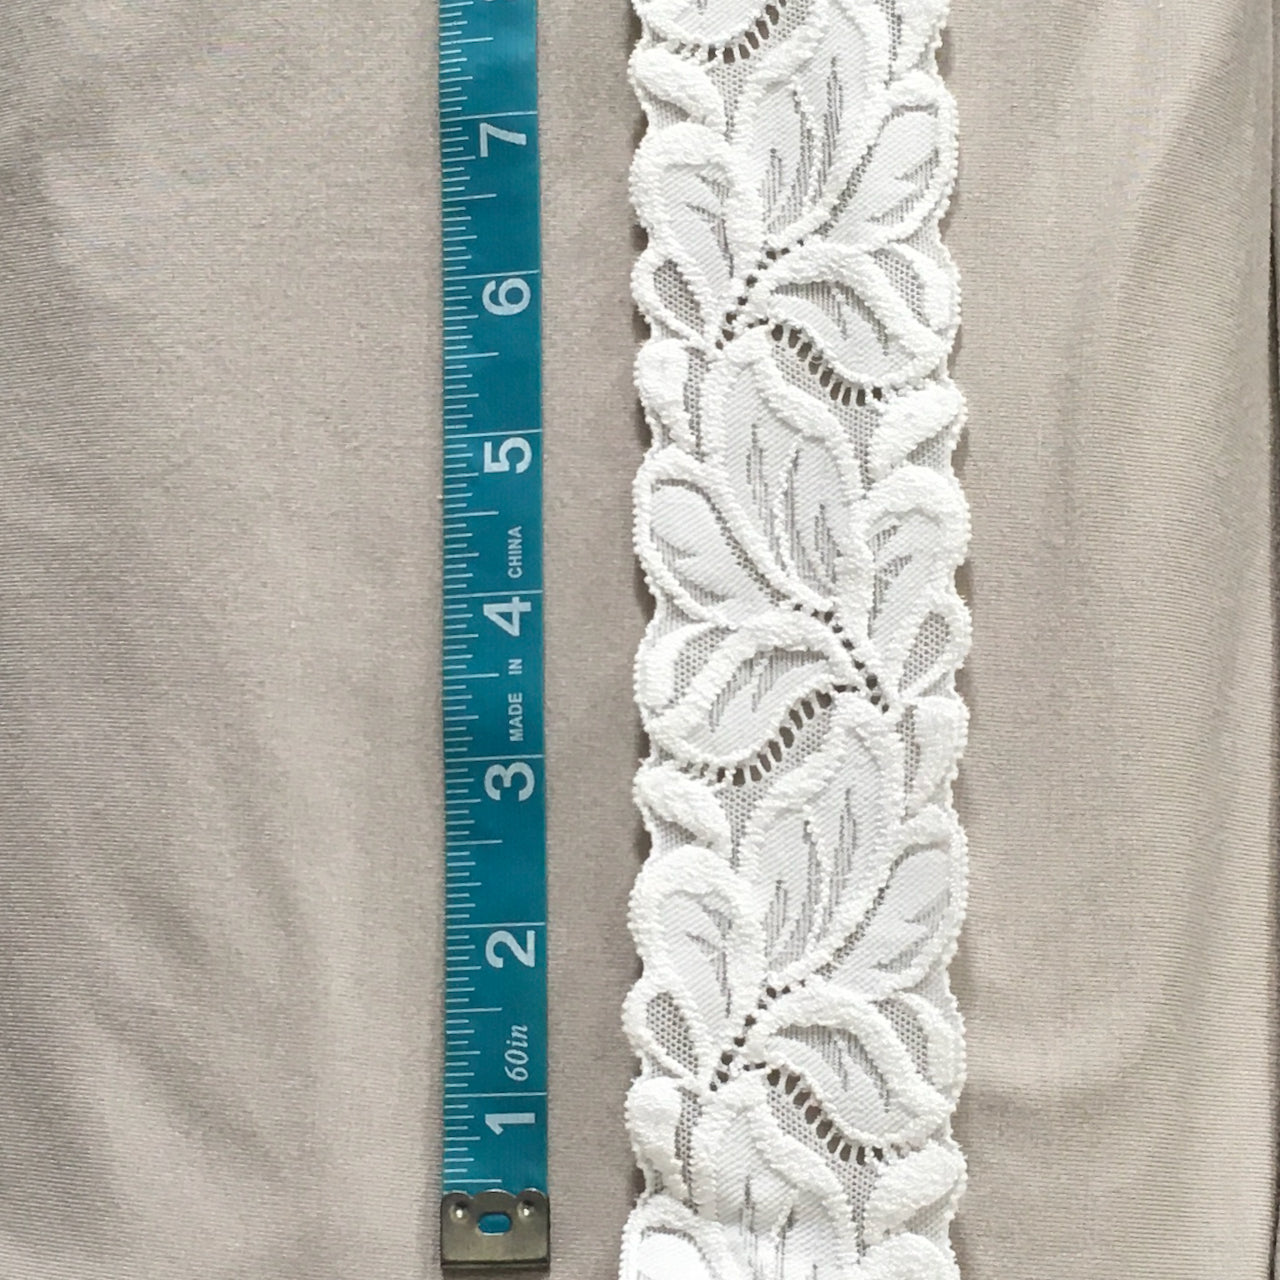 Trim Lace / Lovely Leaves White - Sold by the half yard